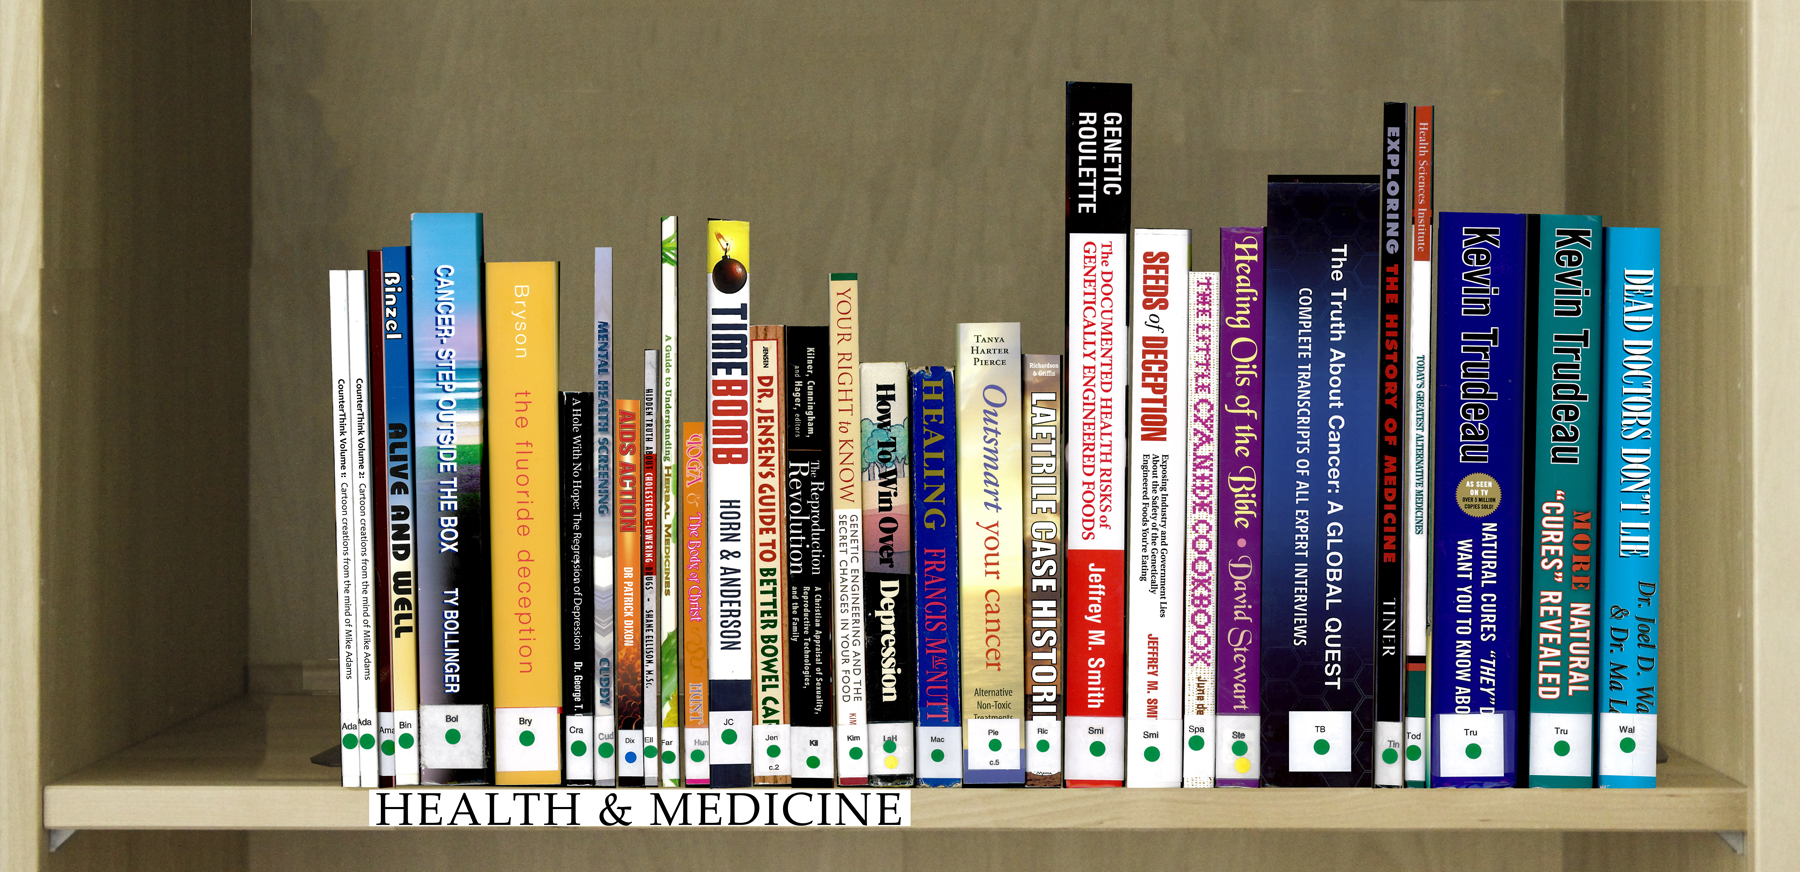 Index of Books Under the Category Health & Medicine.